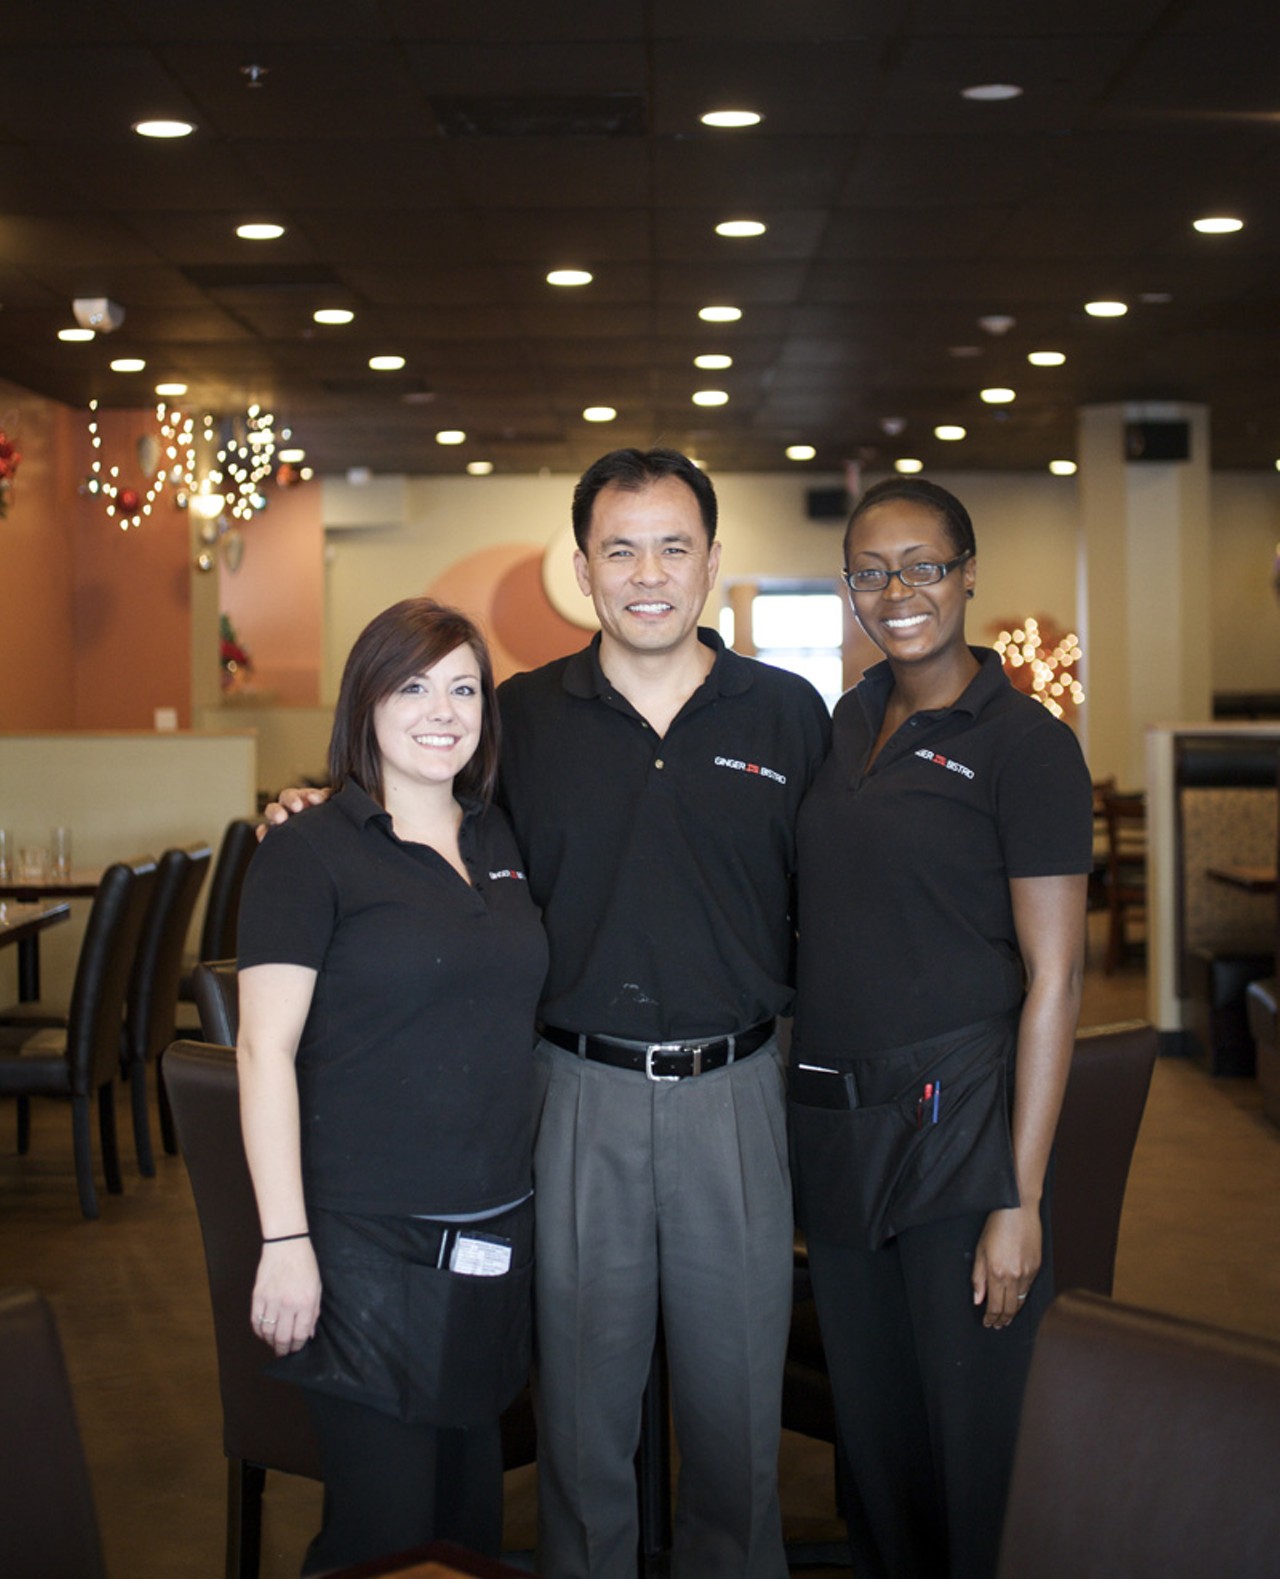 One of the owners, John Huang, with servers Stephanie Martin (on left) and Lauren Hollins (on right).